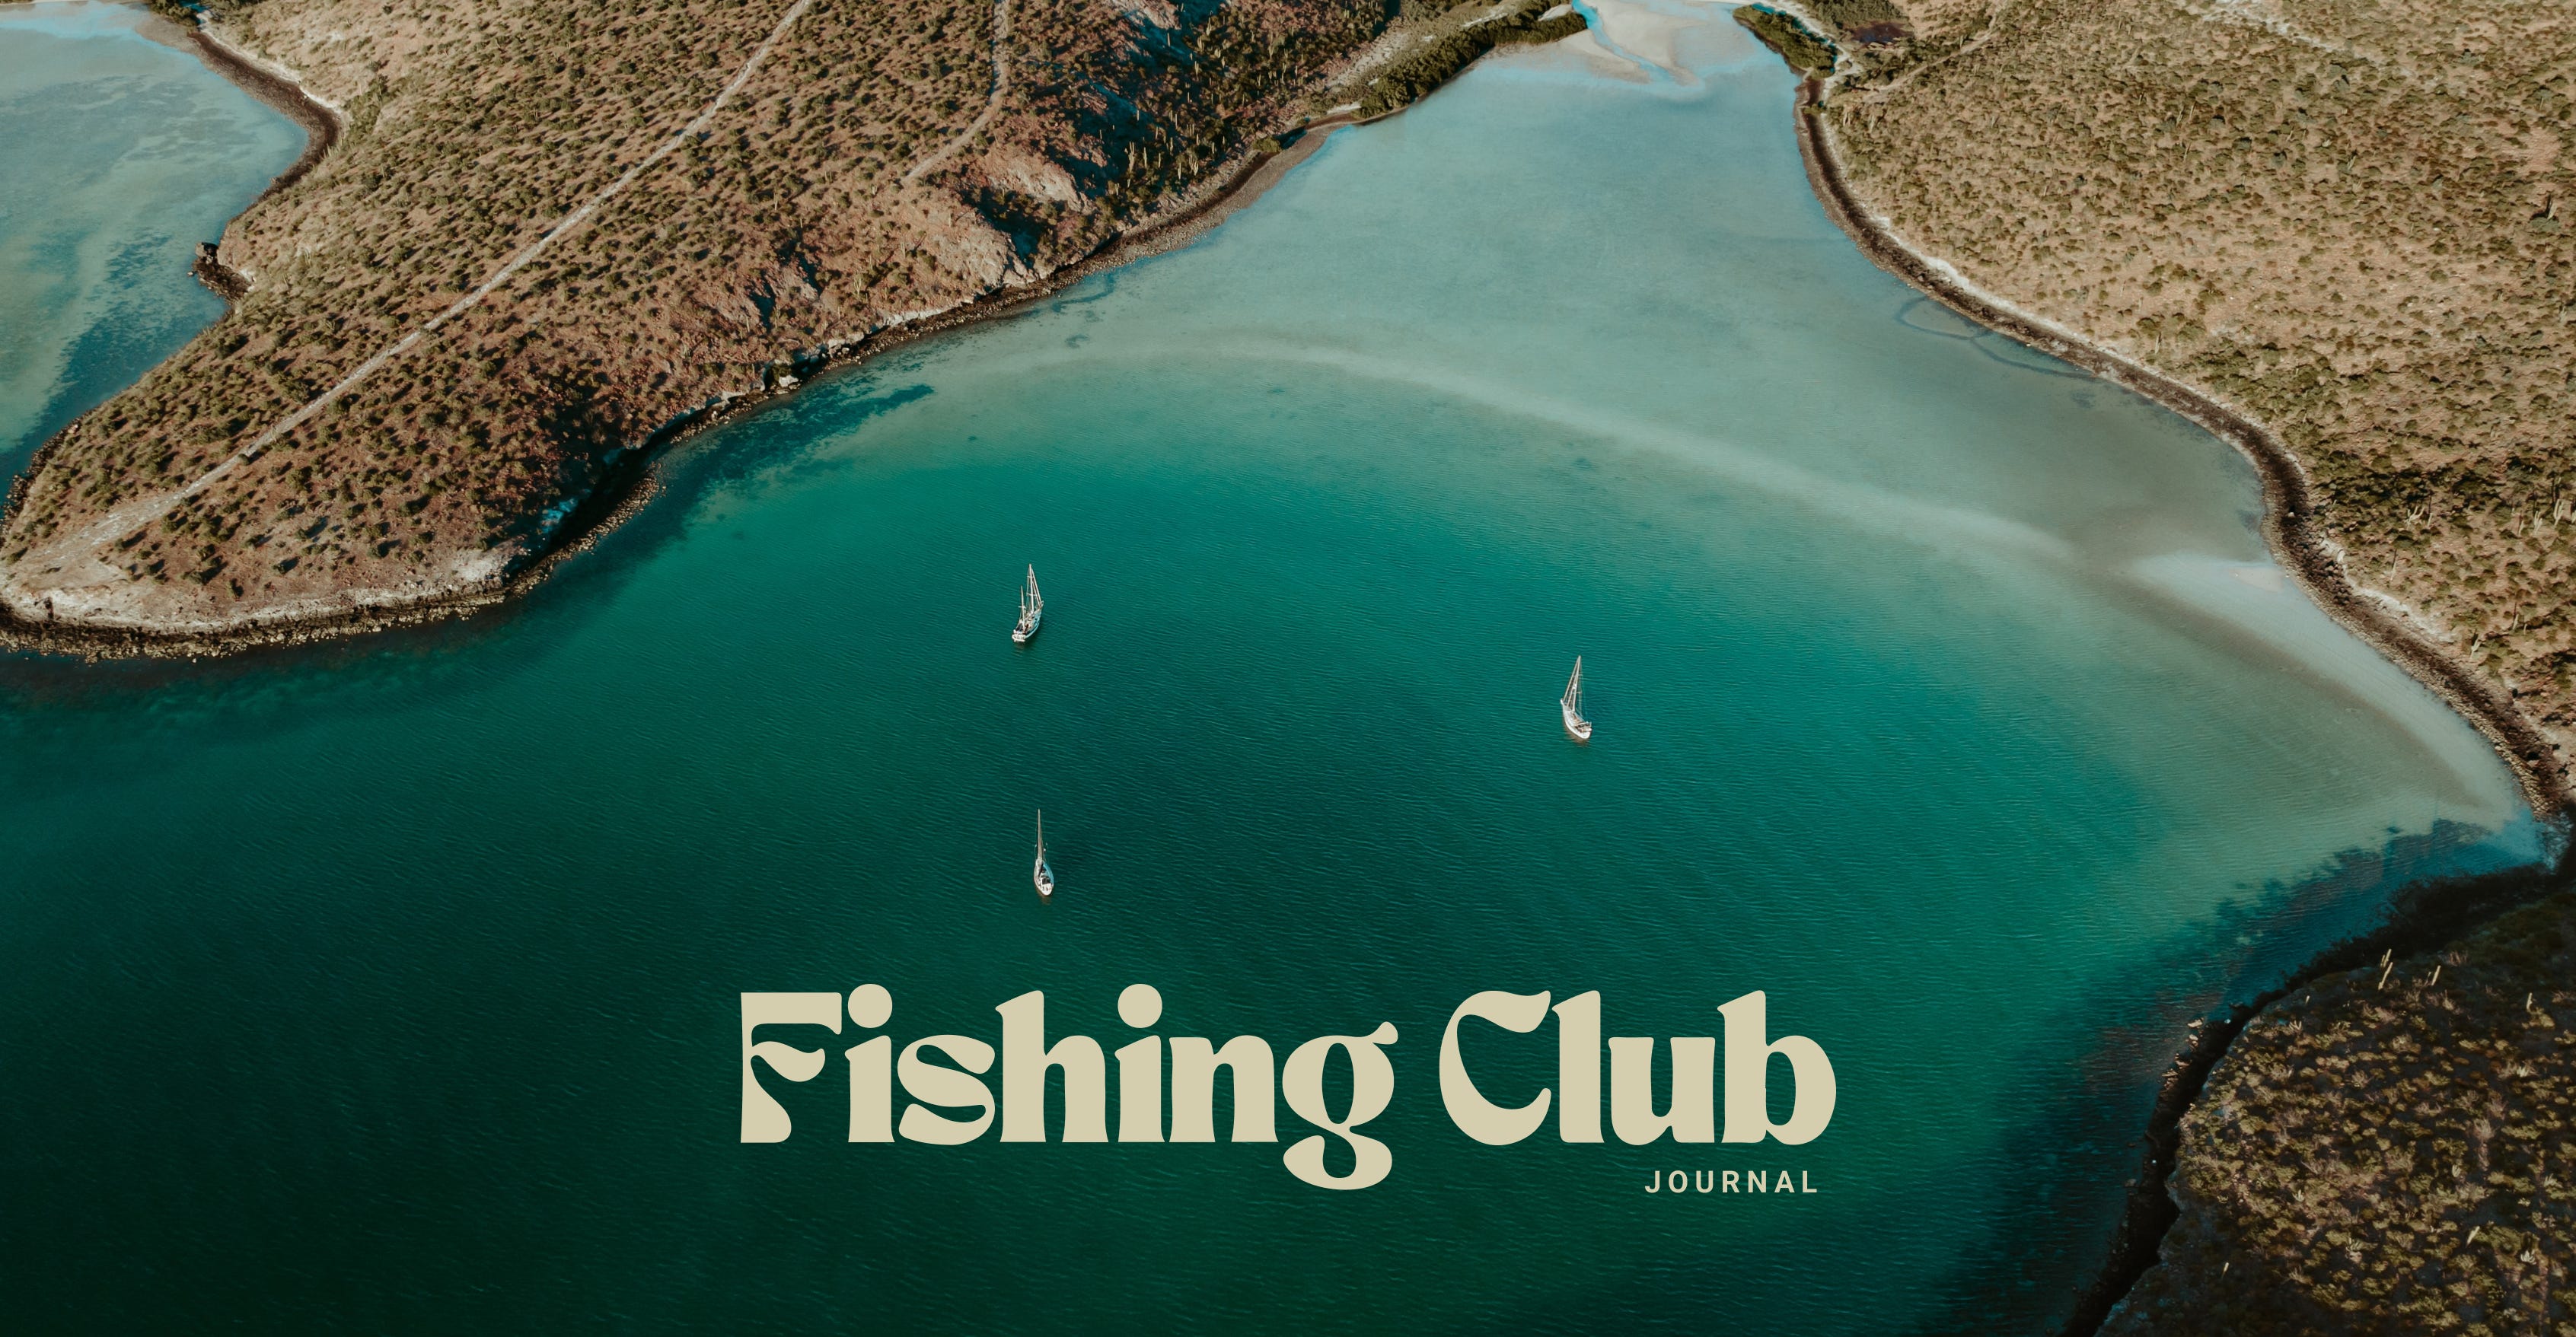 The Fishing Club Journal - Issue #19